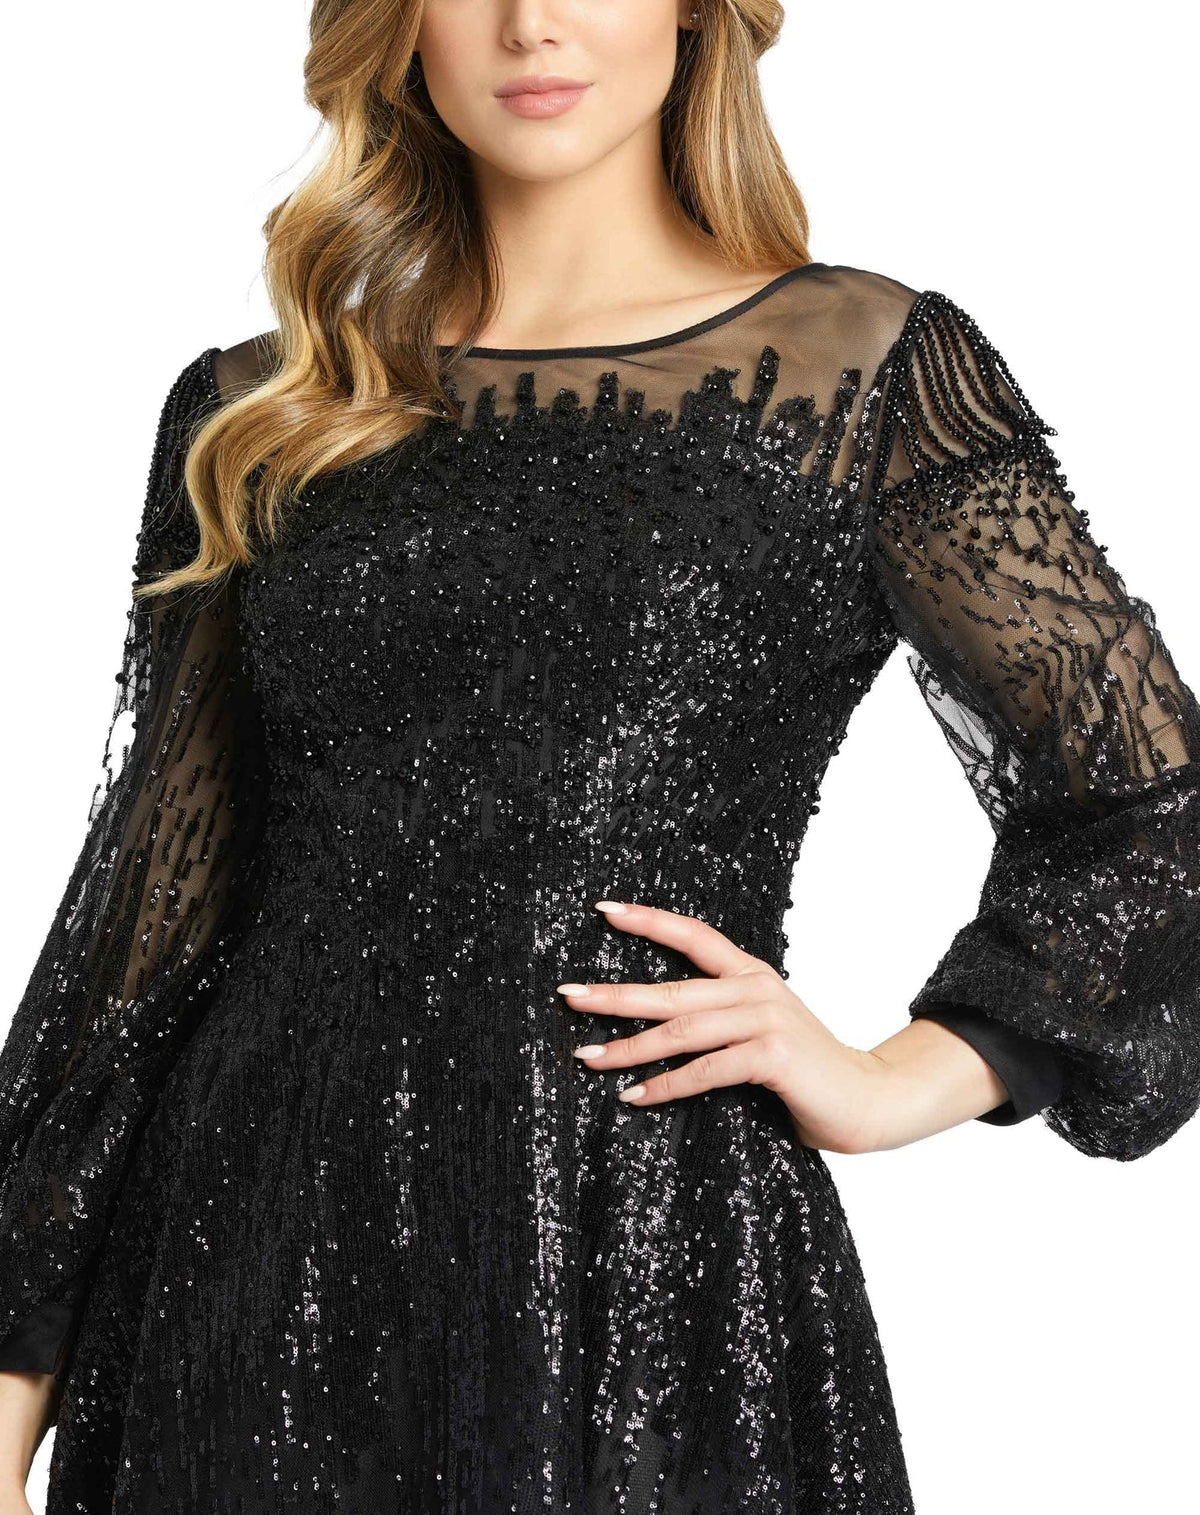 Jewel encrusted long sleeve A line modest gown - black close up